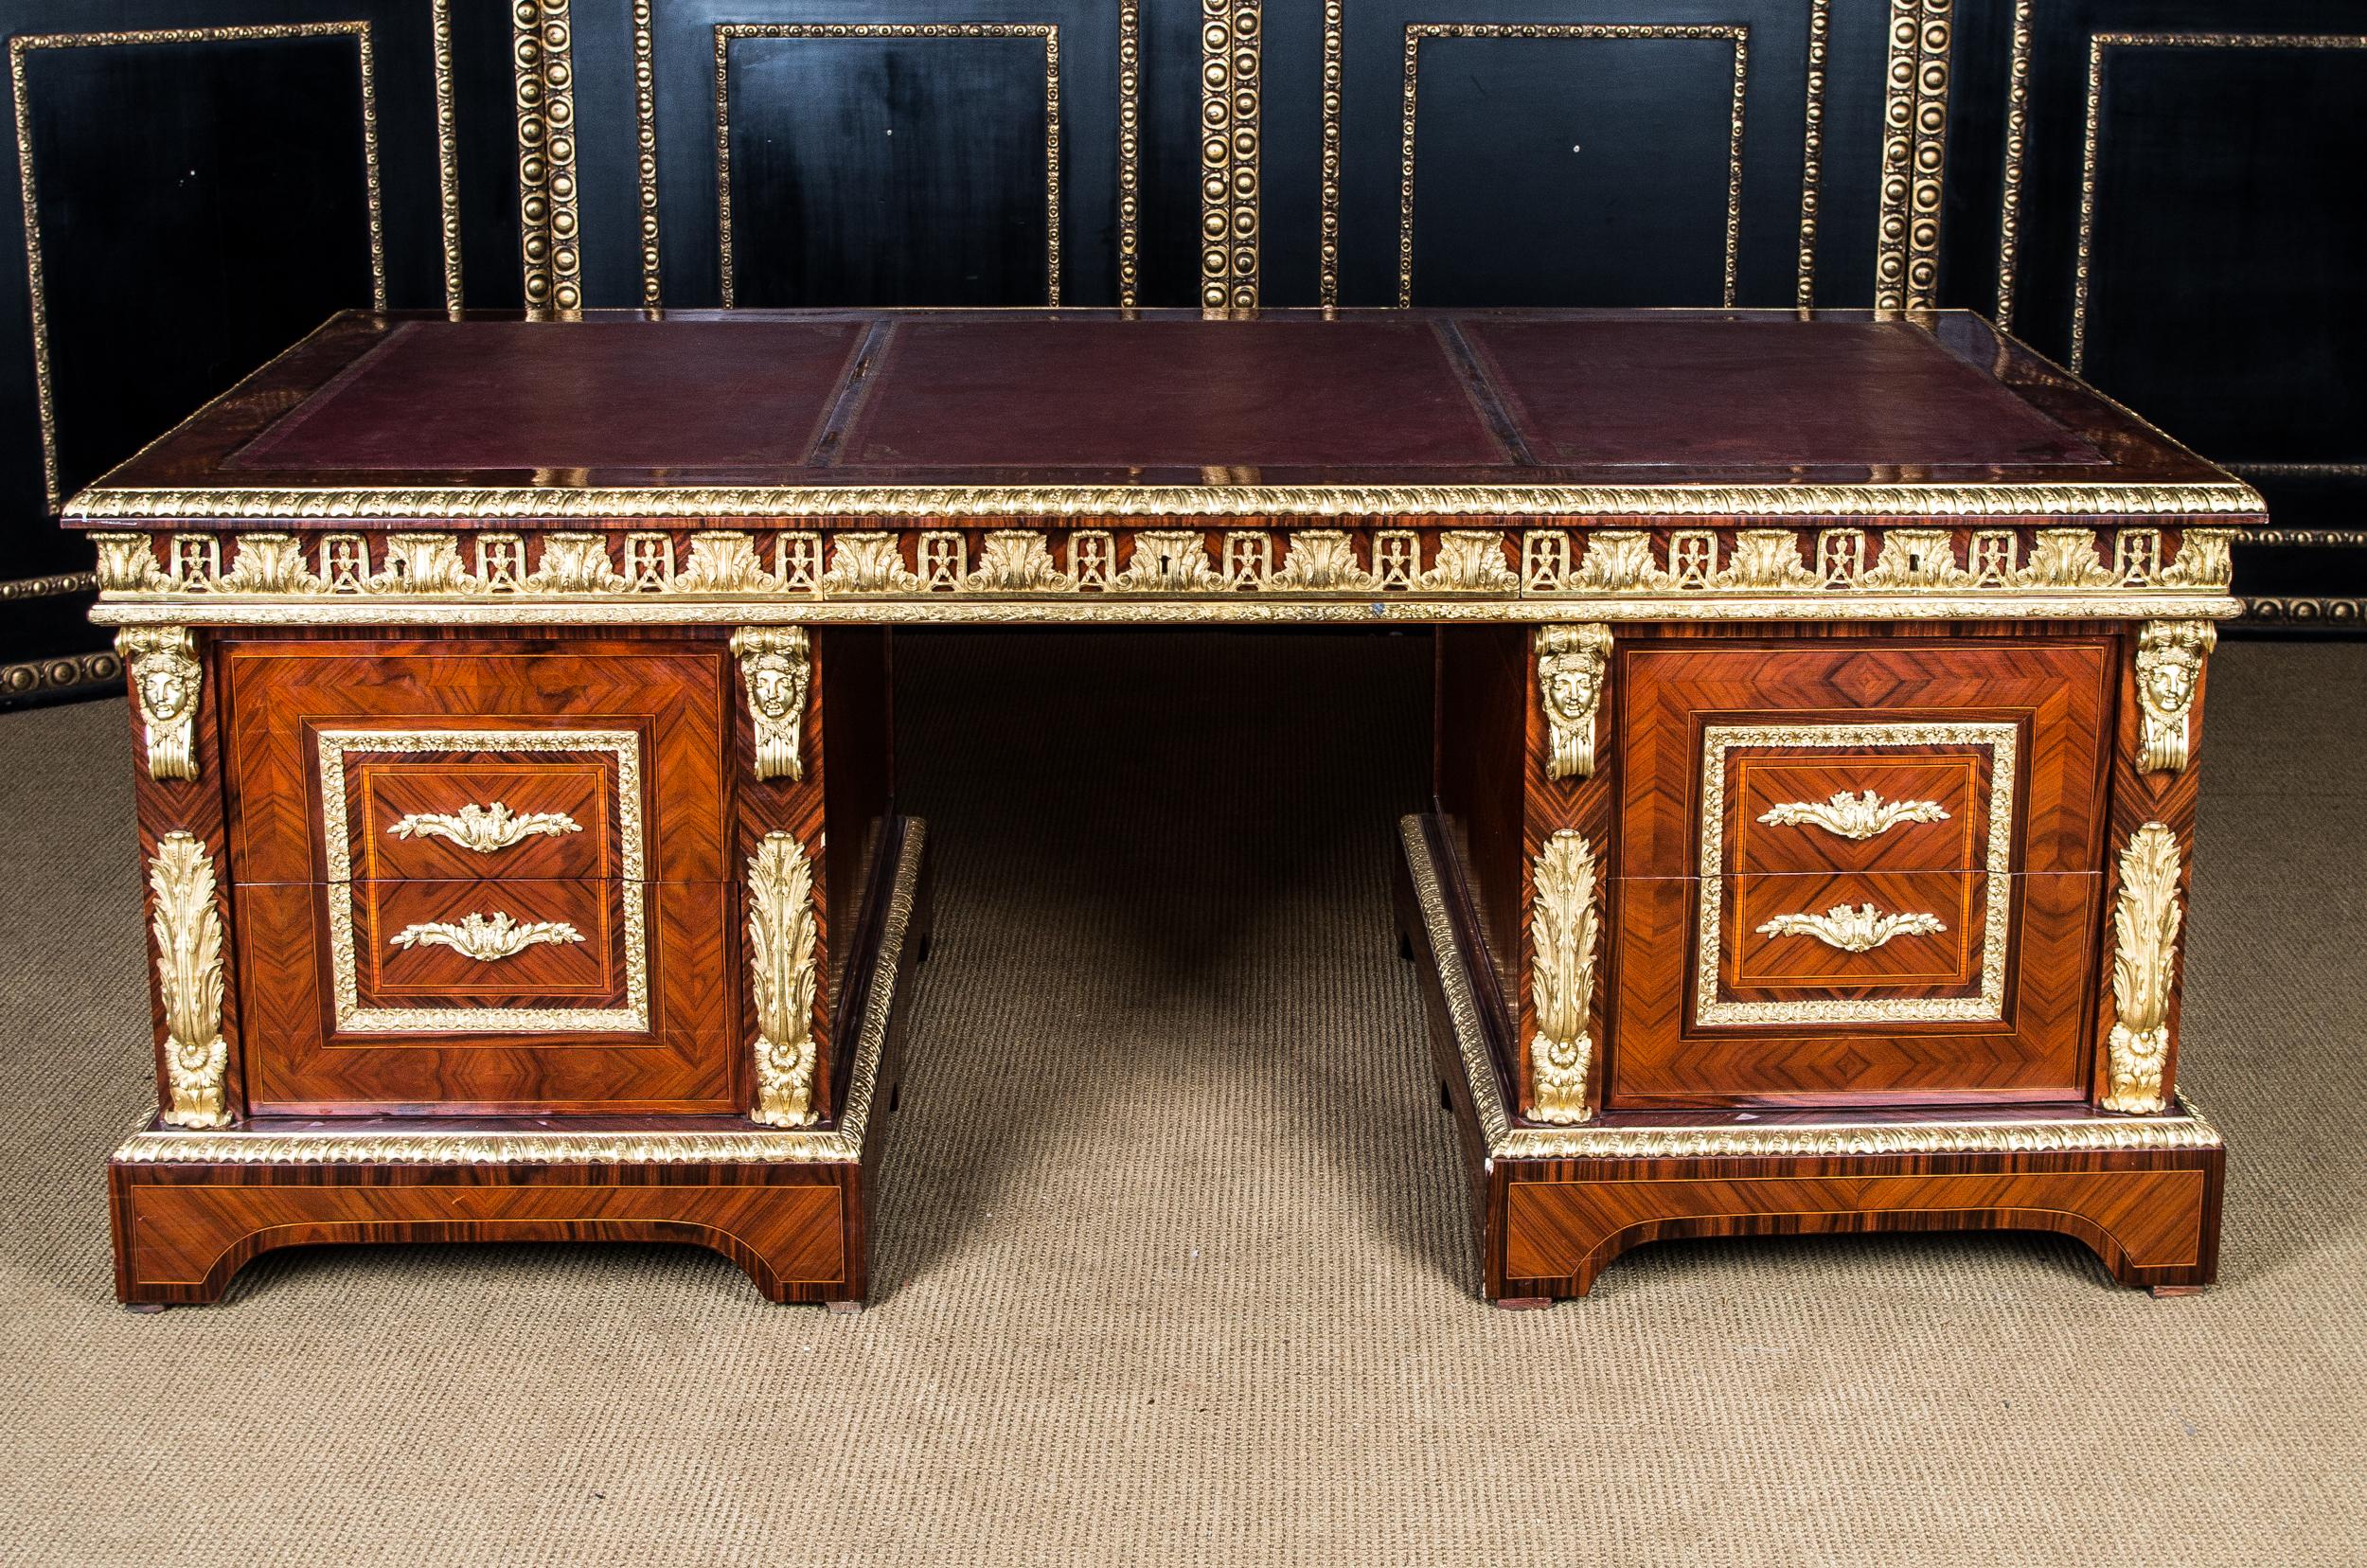 Royal palisander and tulip wood on softwood. Three-part straight frame base. Slightly protruding, broadly framed writing surface, inlaid with gold embossed leather surface, including three drawers of different sizes with decorated frieze of acanthus